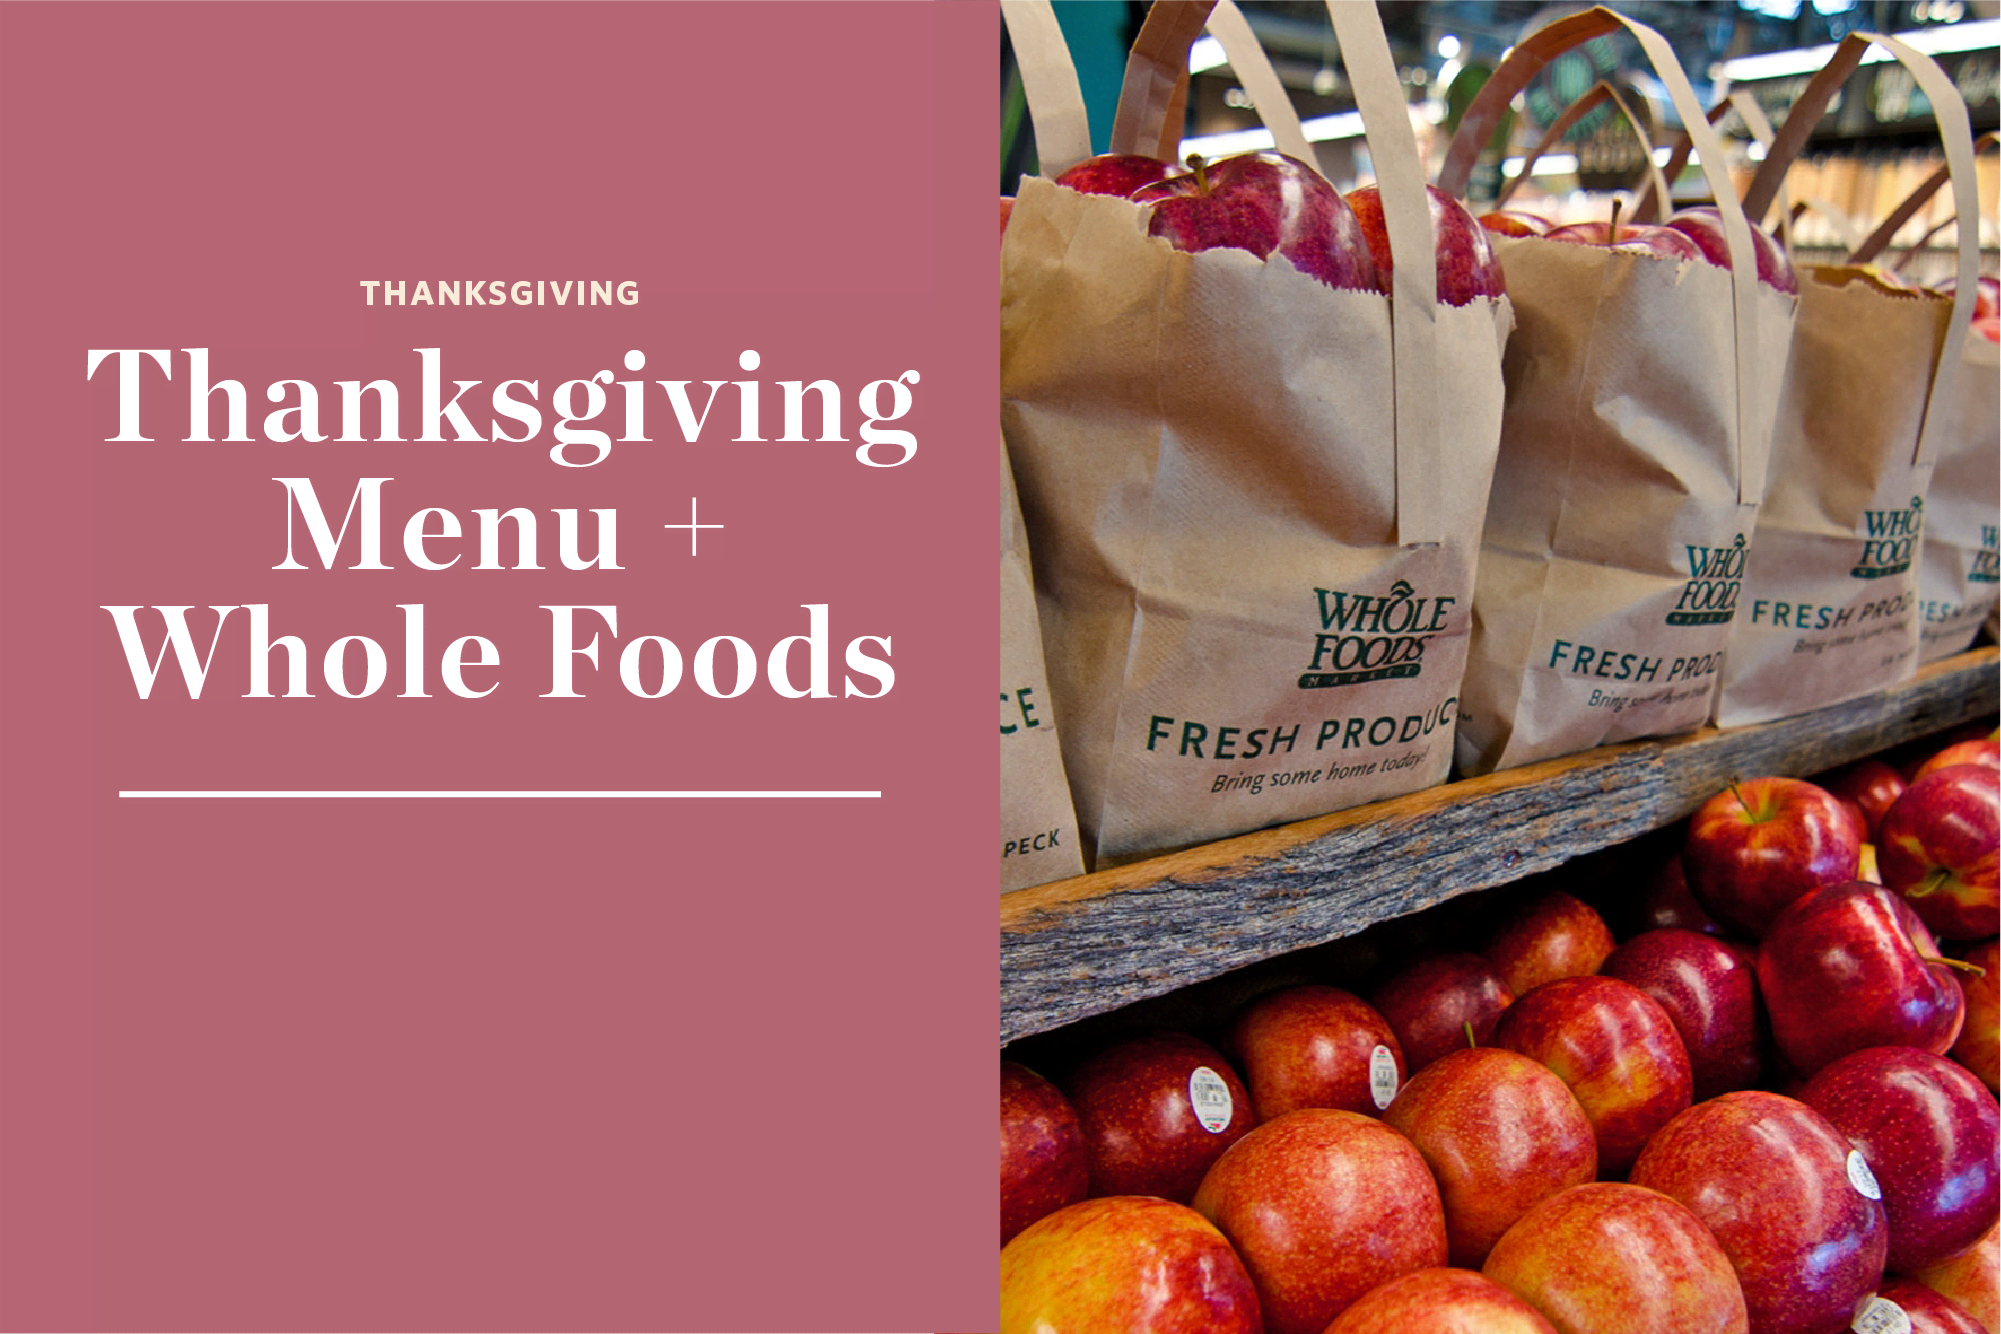 is offering same-day delivery for Whole Foods groceries on  Thanksgiving